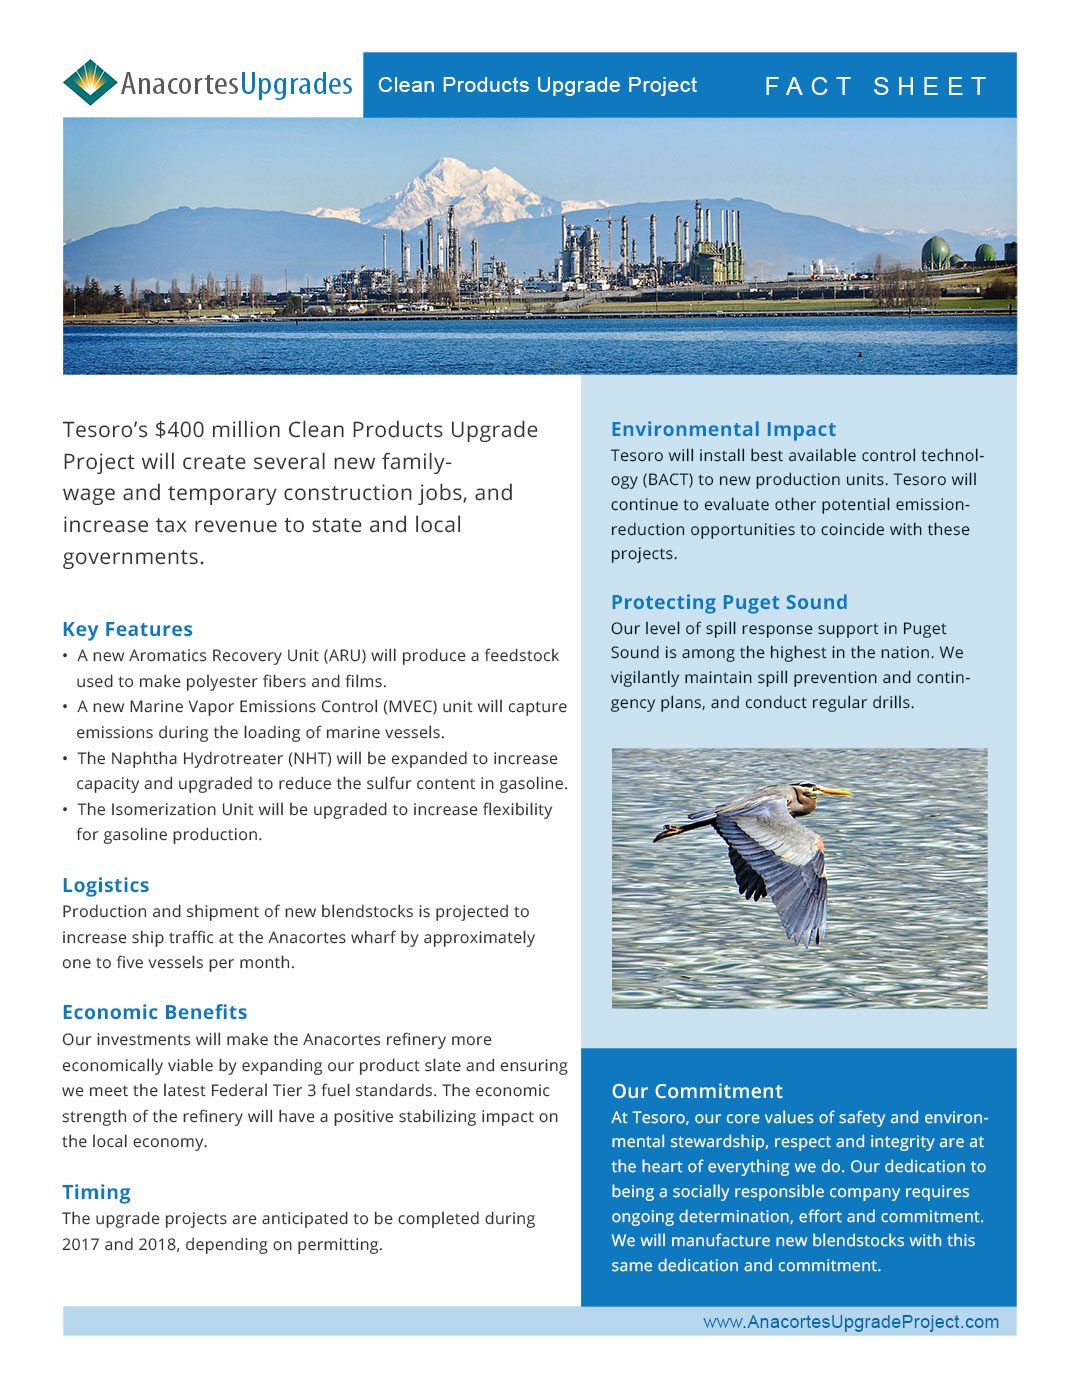 Anacortes project fact sheet